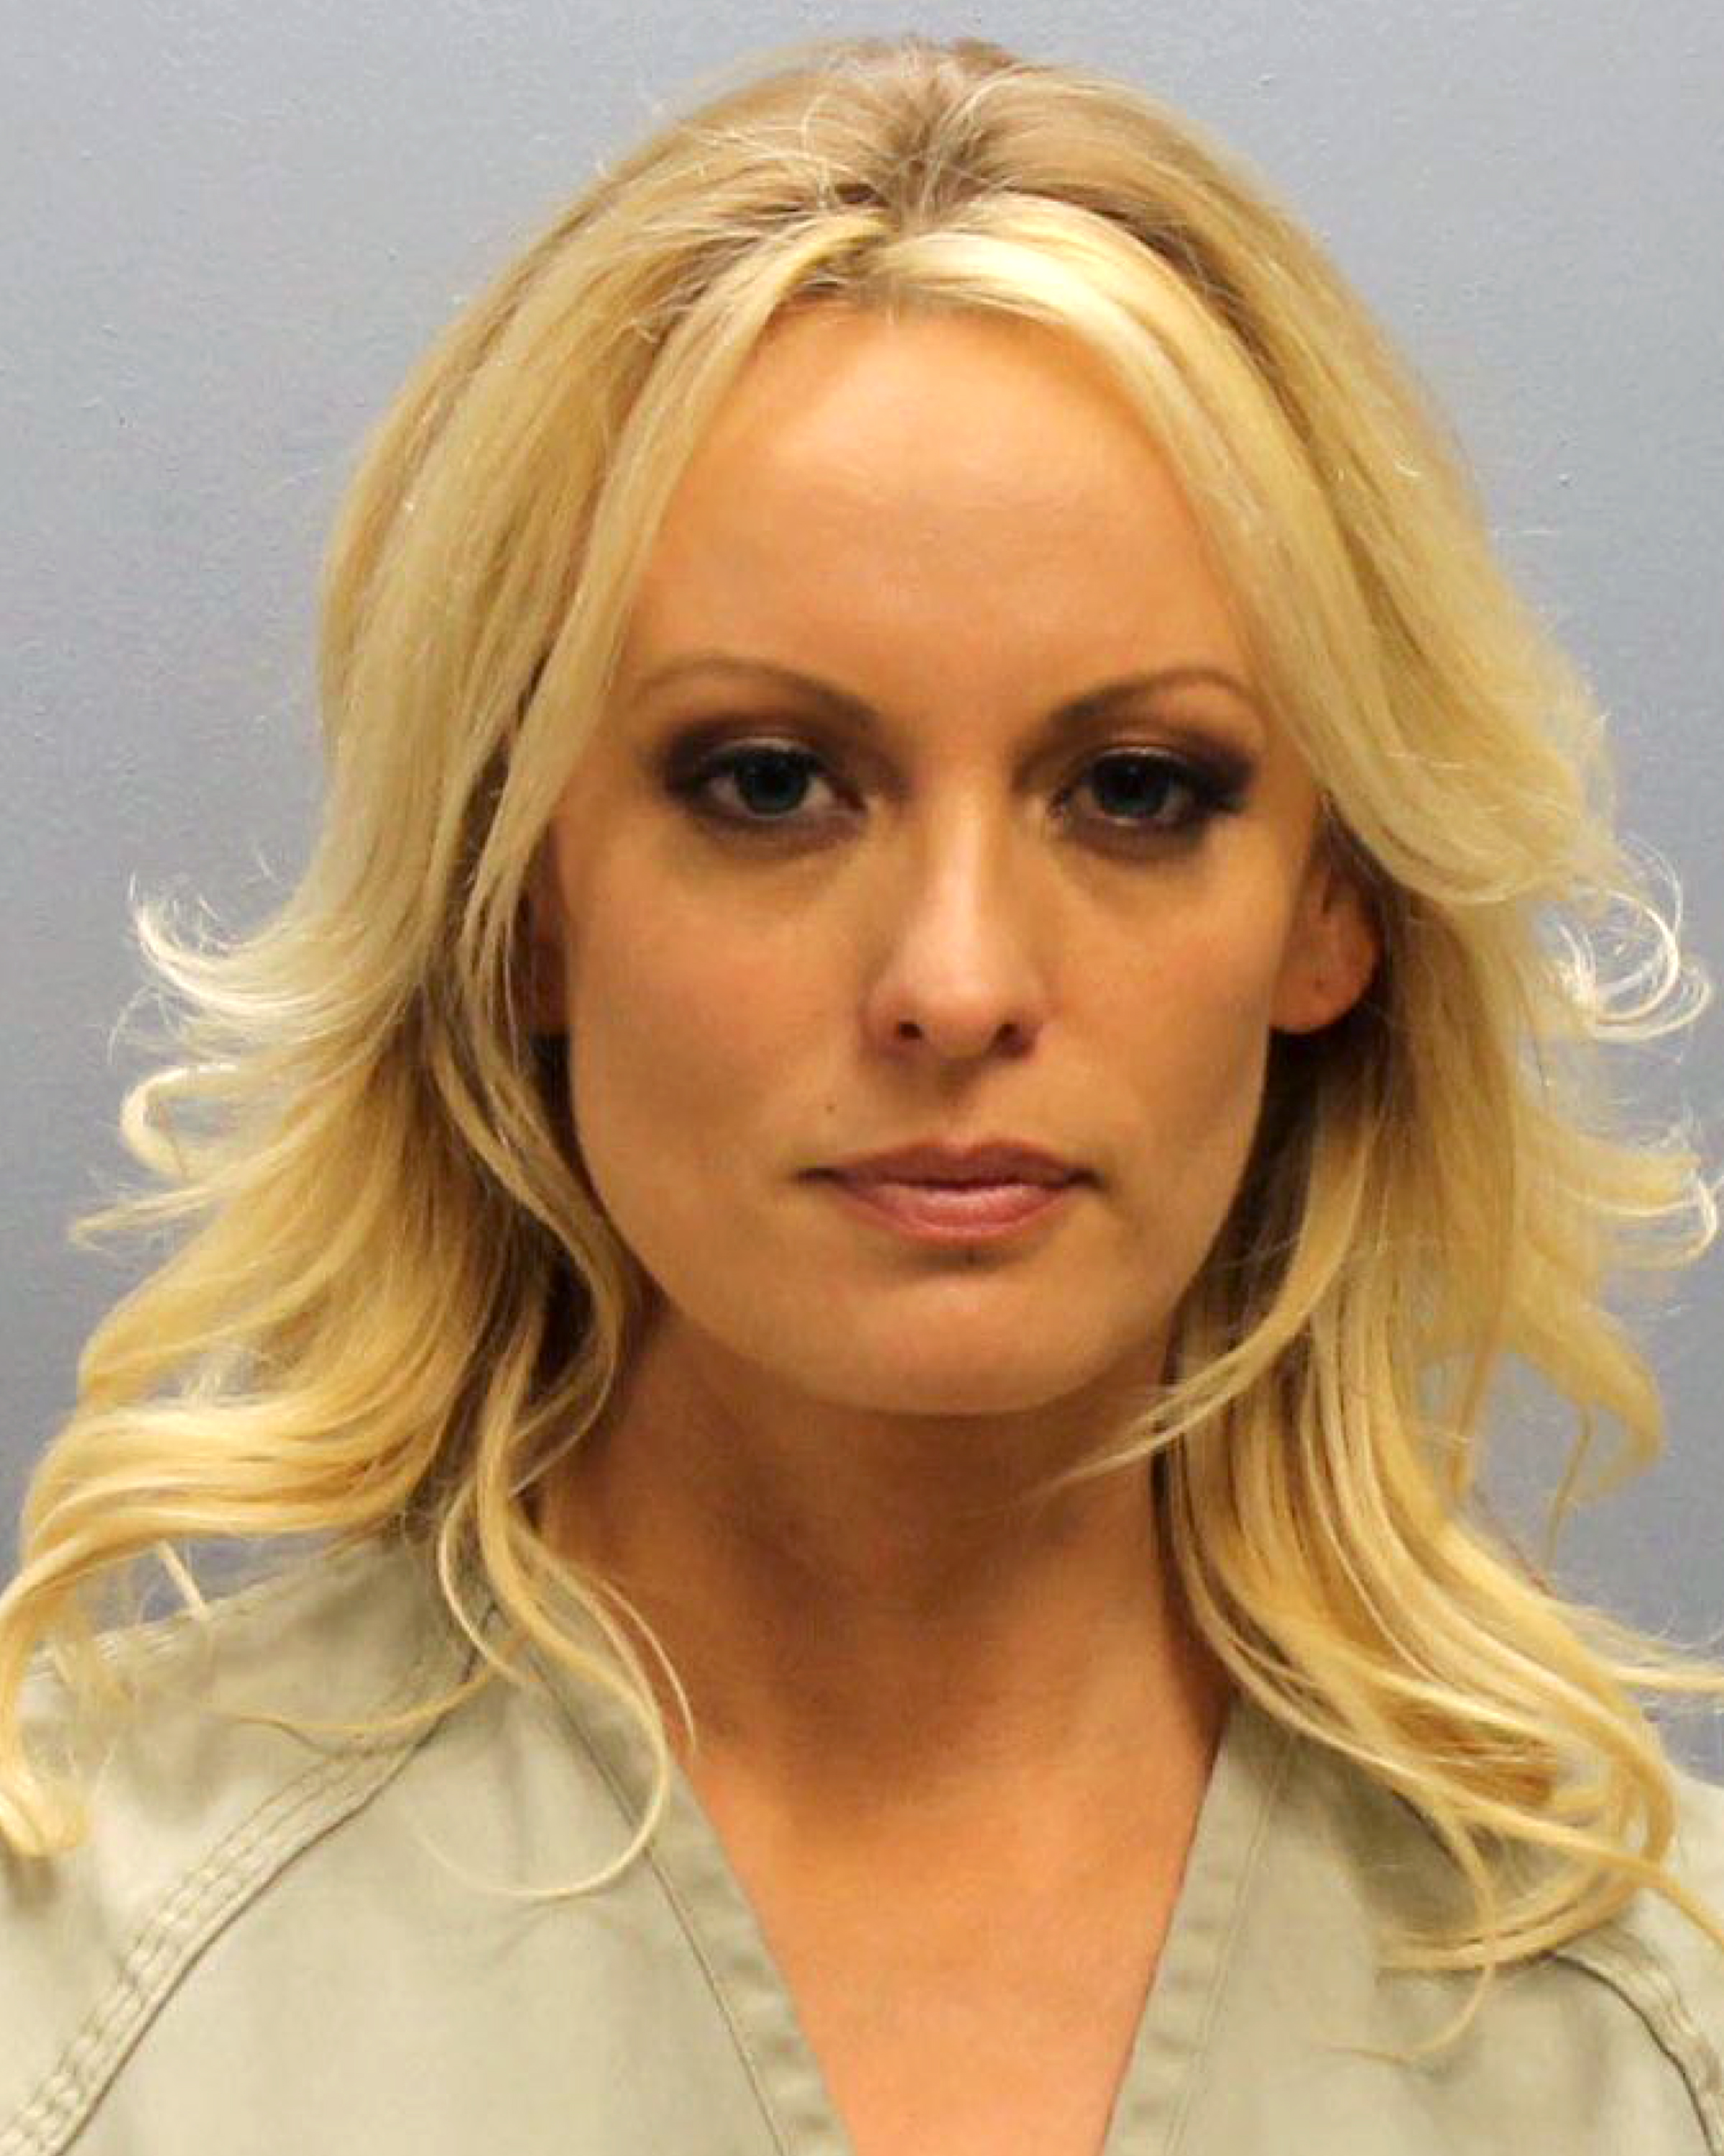 In this handout provided by Franklin County Sheriff's Office, adult film actress Stephanie Clifford aka Stormy Daniels poses for a mugshot photo after being arrested at an Ohio strip club for allegedly touching three undercover detectives during her performance in violation of state law July 12, 2018 in Columbus, Ohio. (Photo by Franklin County Sheriff's Office via Getty Images)